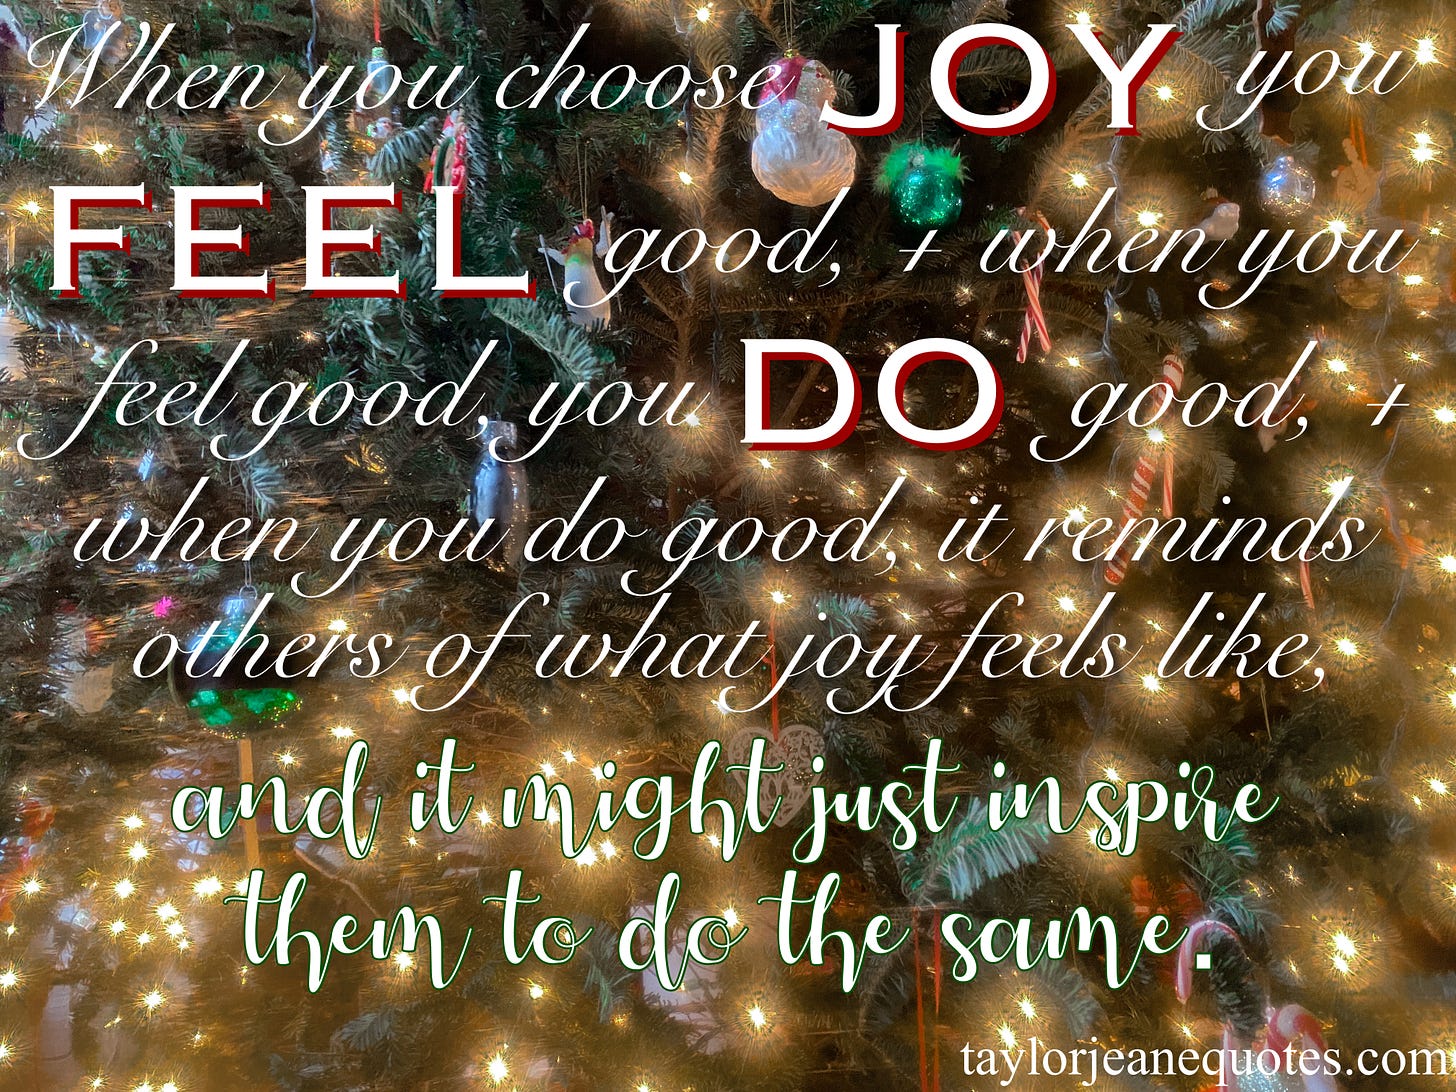 taylor jeane quotes, taylor jeane, taylor wilson, quote of the day, free quote of the day subscription, christmas quotes, holiday season quotes, december quotes, inspirational quotes, joyful quotes, giving quotes, gratitude quotes, happiness quotes, positive quotes, inspiring christmas quotes, inspirational holiday quotes